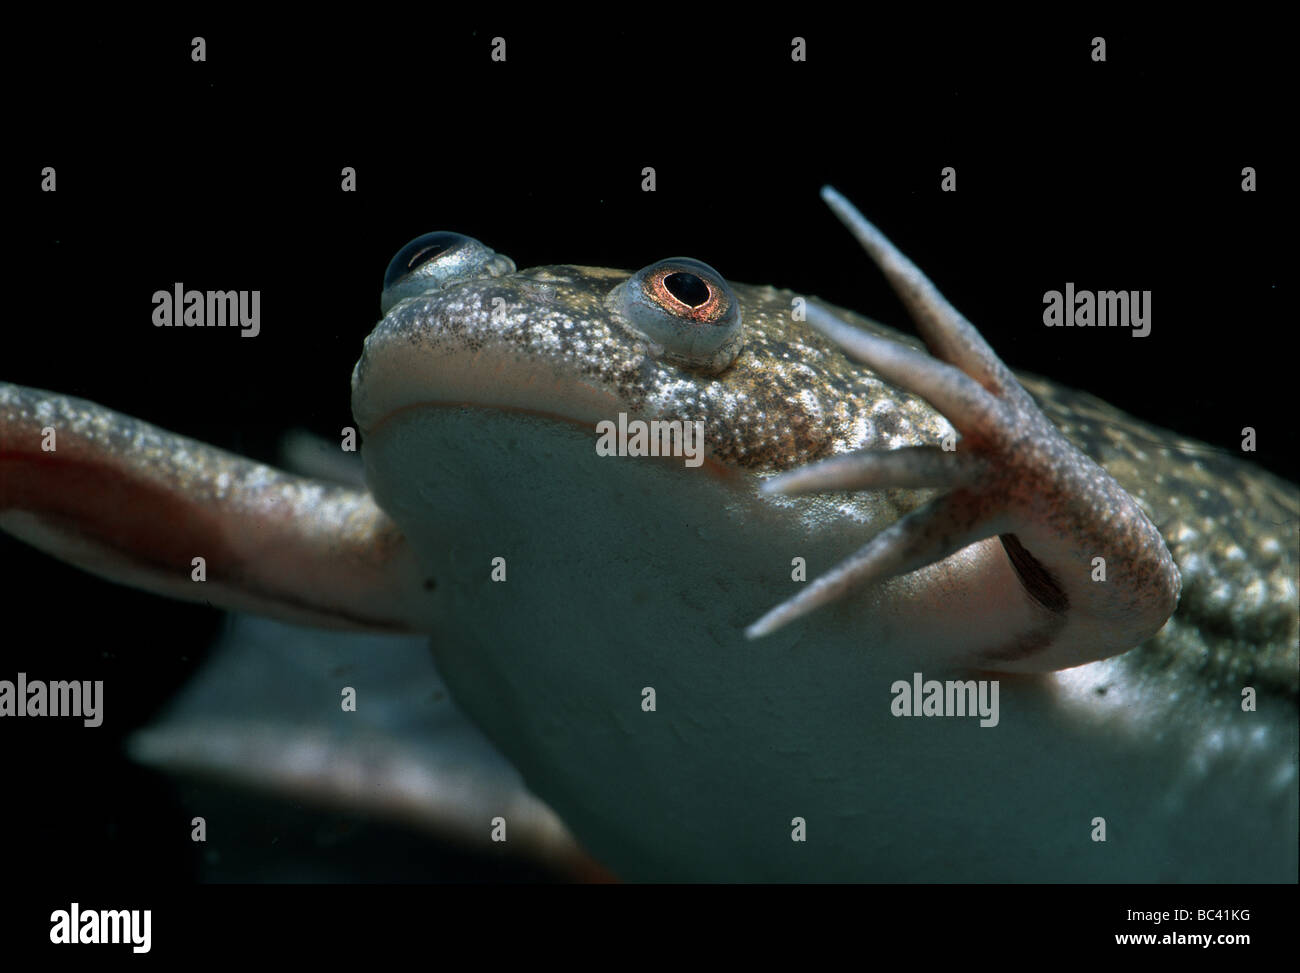 African Clawed Frog, Xenopus laevis Stock Photo